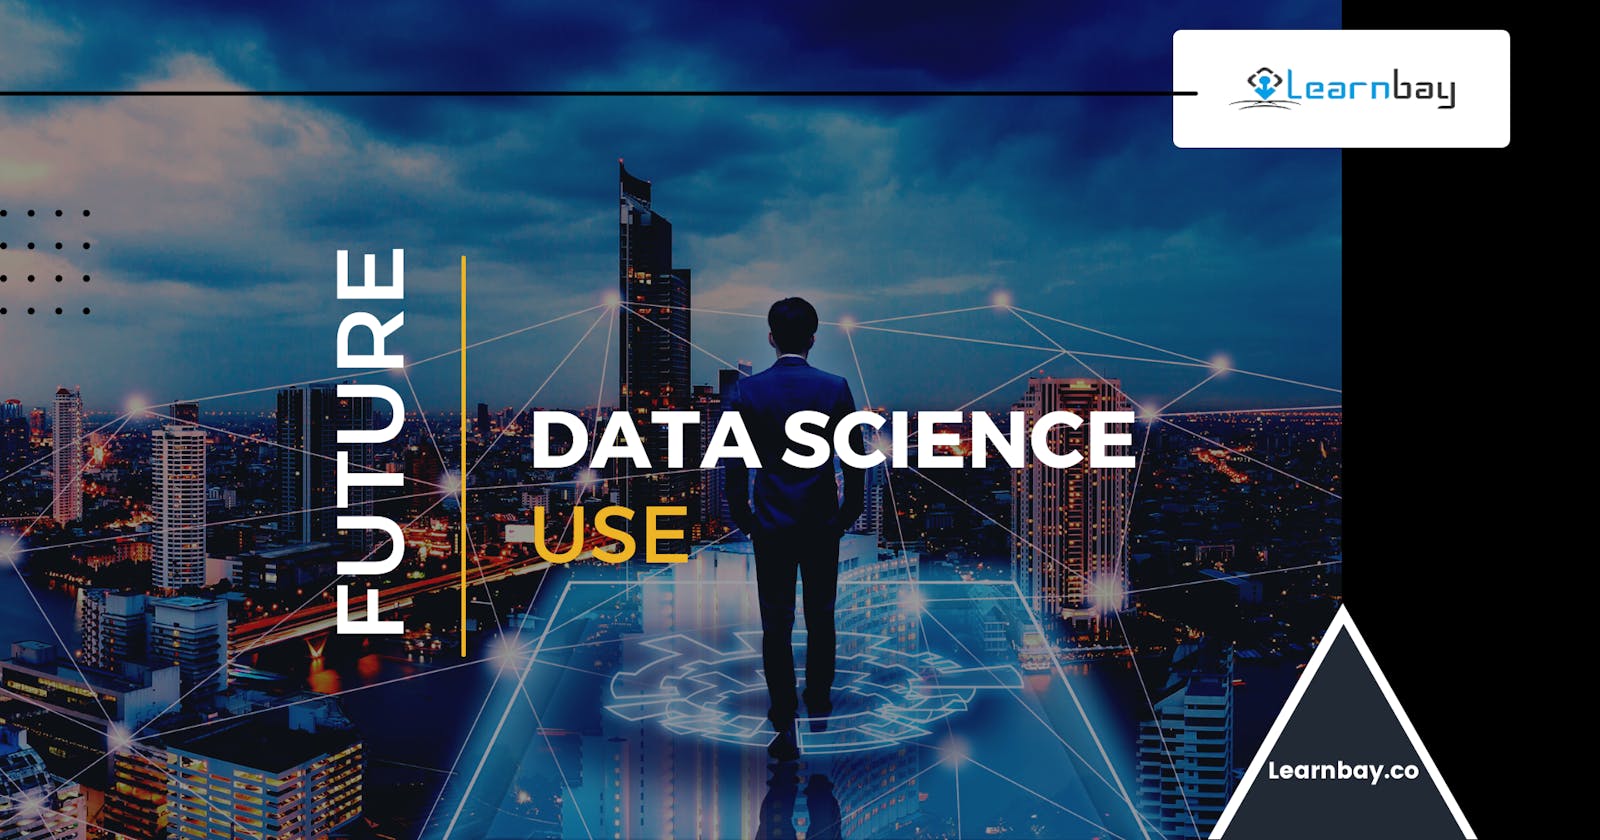 What Will Data Science Be Used for in The Future?